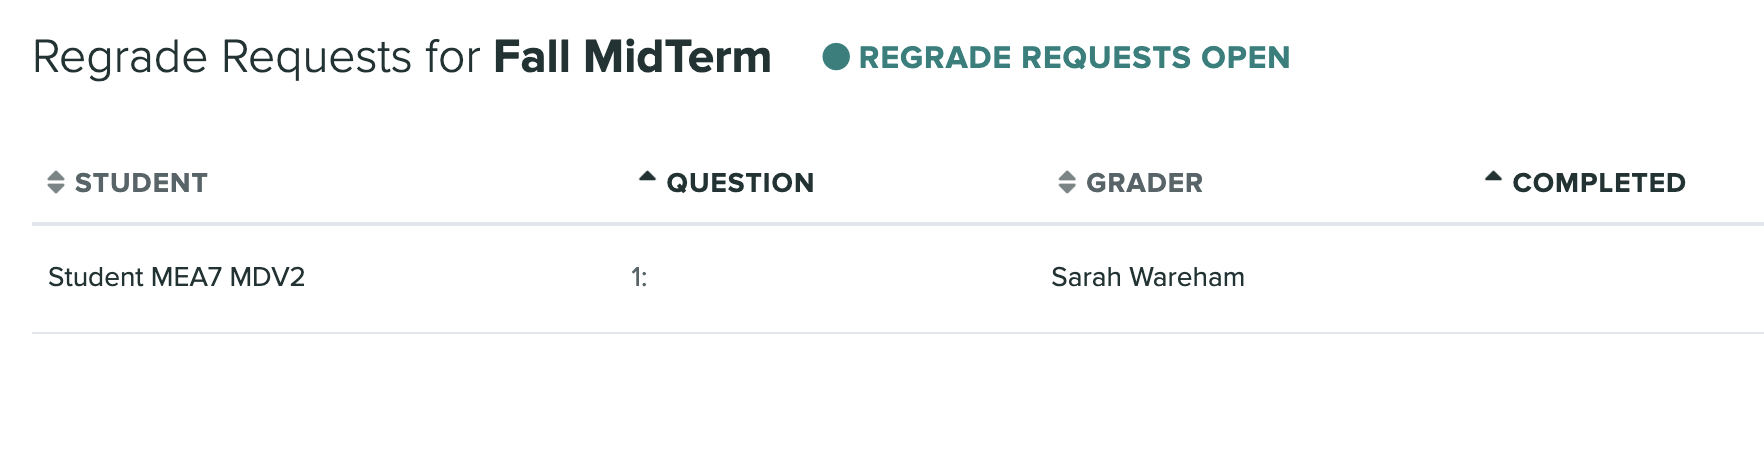 Regrade Request page with anonymized student